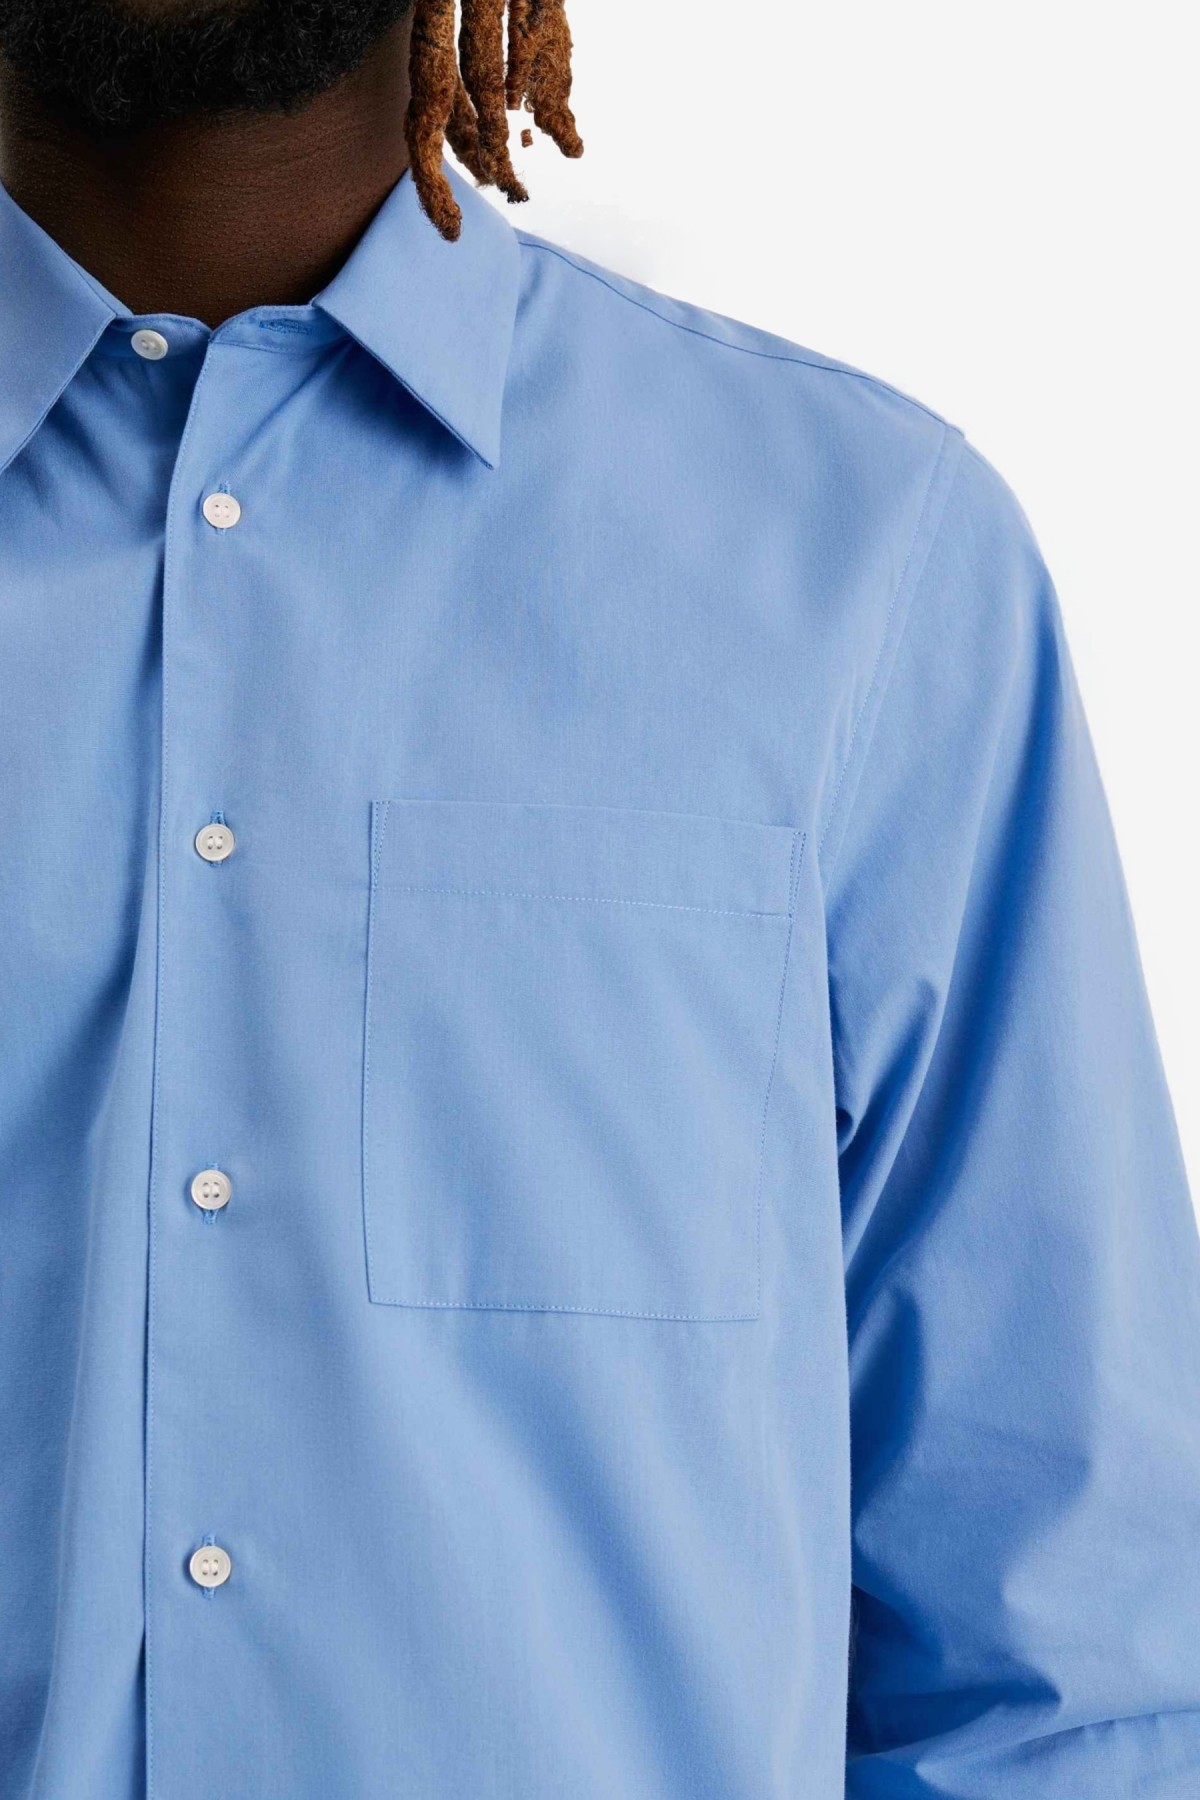 Another Aspect Shirt 3.0 in Capri Blue